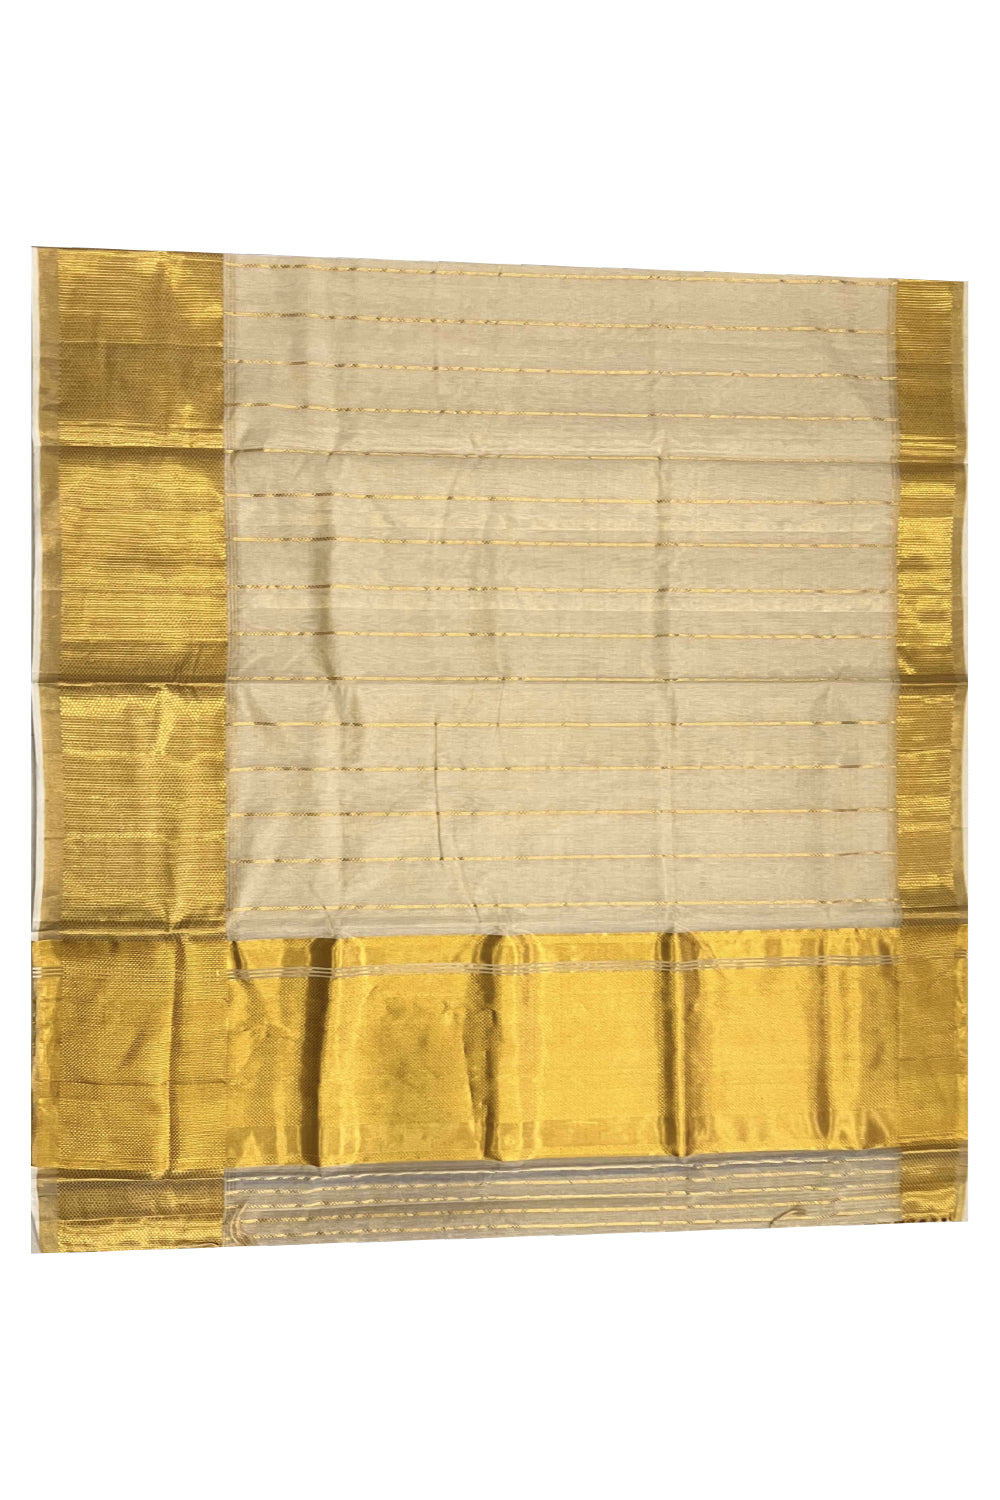 Southloom Premium Kuthampully Handloom Stripes Work Tissue Saree with 12 inch Woven Patterns on Pallu